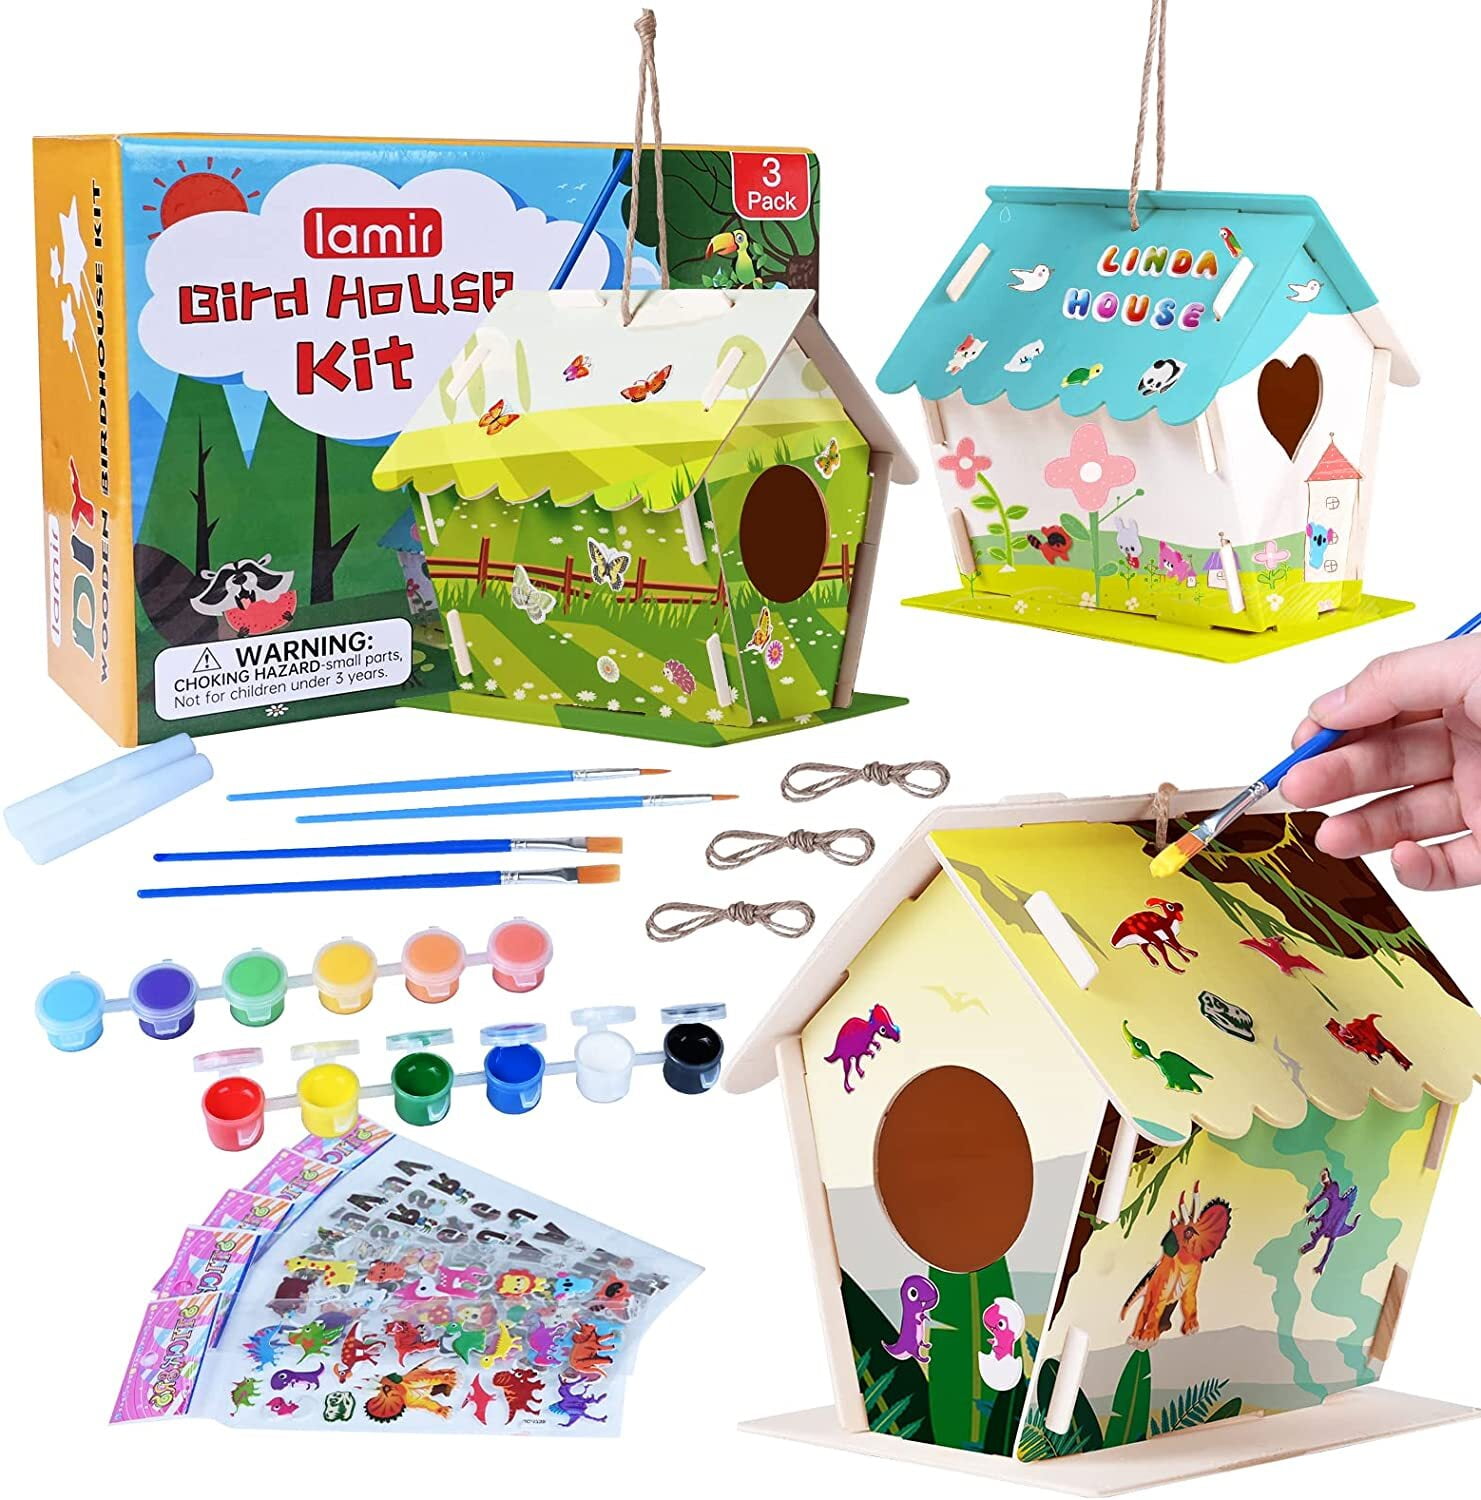 Build Your Own My Window Birdhouse KIT USA MADE! PERFECT FOR EASTER BASKETS 